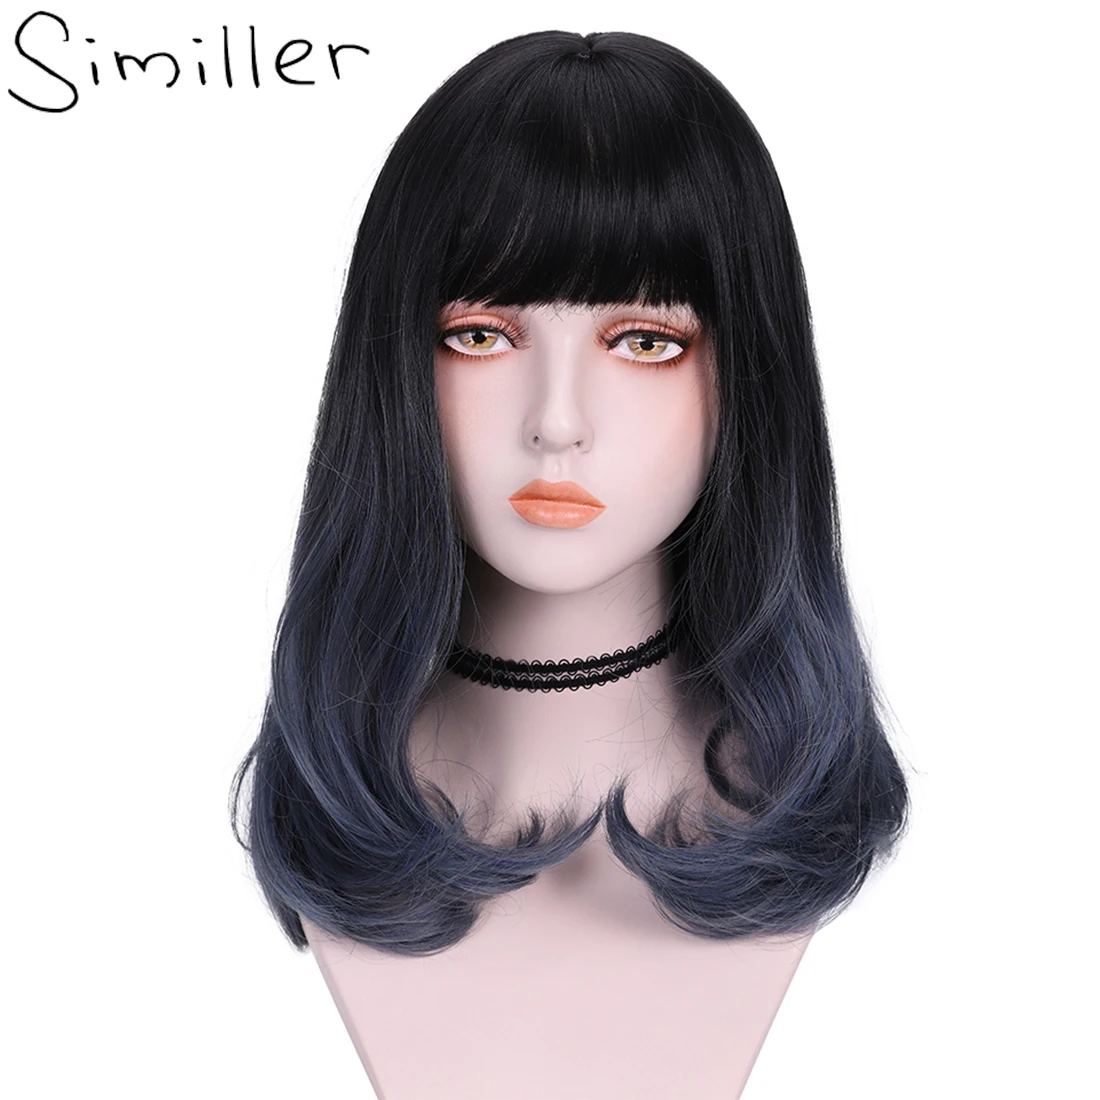 

Similler Women Curly Synthetic Wigs Medium Length High Temperature Fiber Black T Gray Blue Ombre Wig for Daily Use